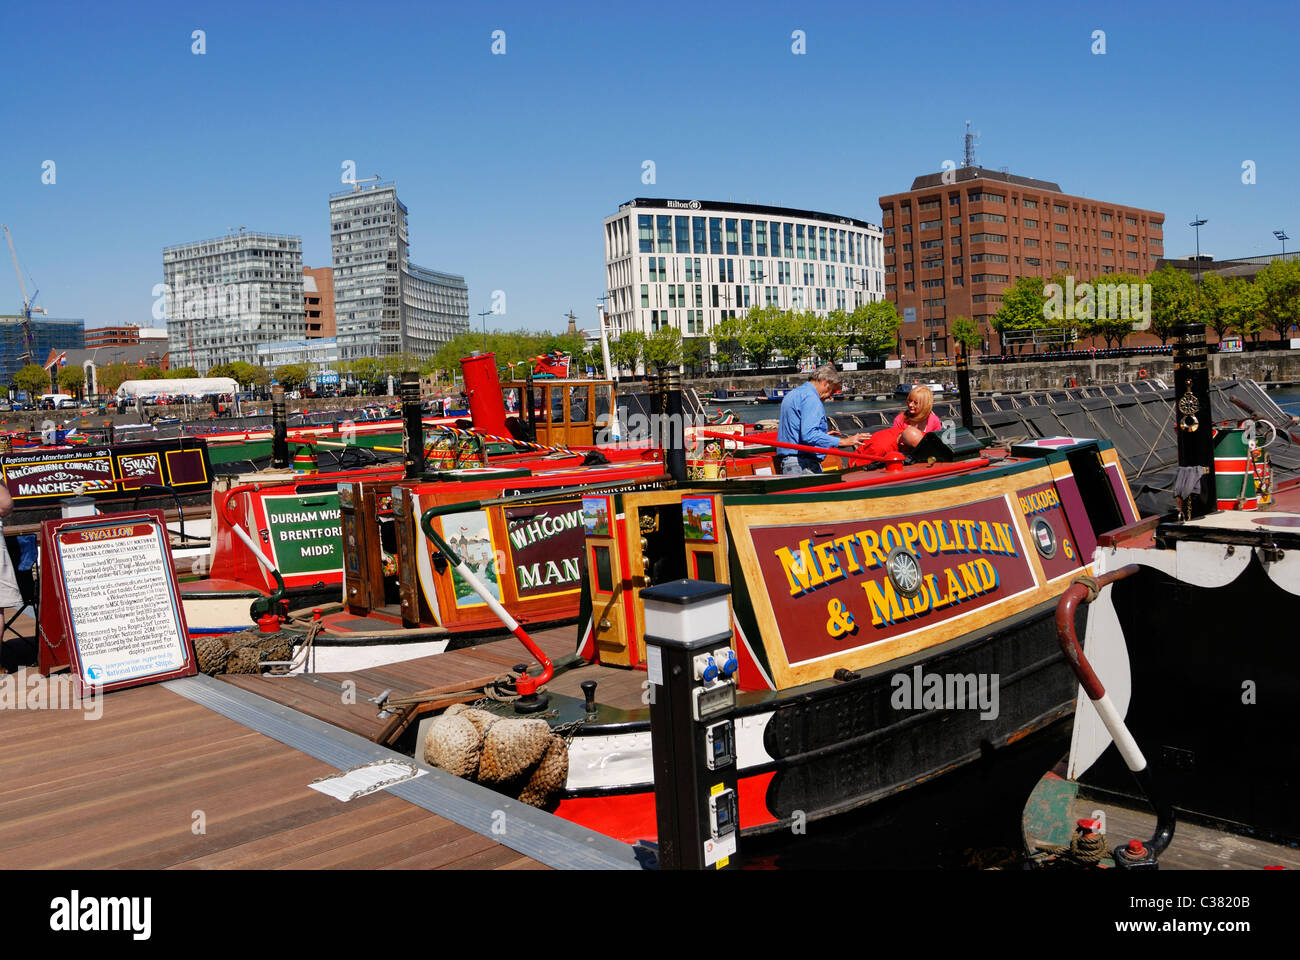 Narrowboats moored in Salthouse Dock ( Albert Dock tourist area ) in Liverpool Docks for the Spring on the Waterfront festival. Stock Photo